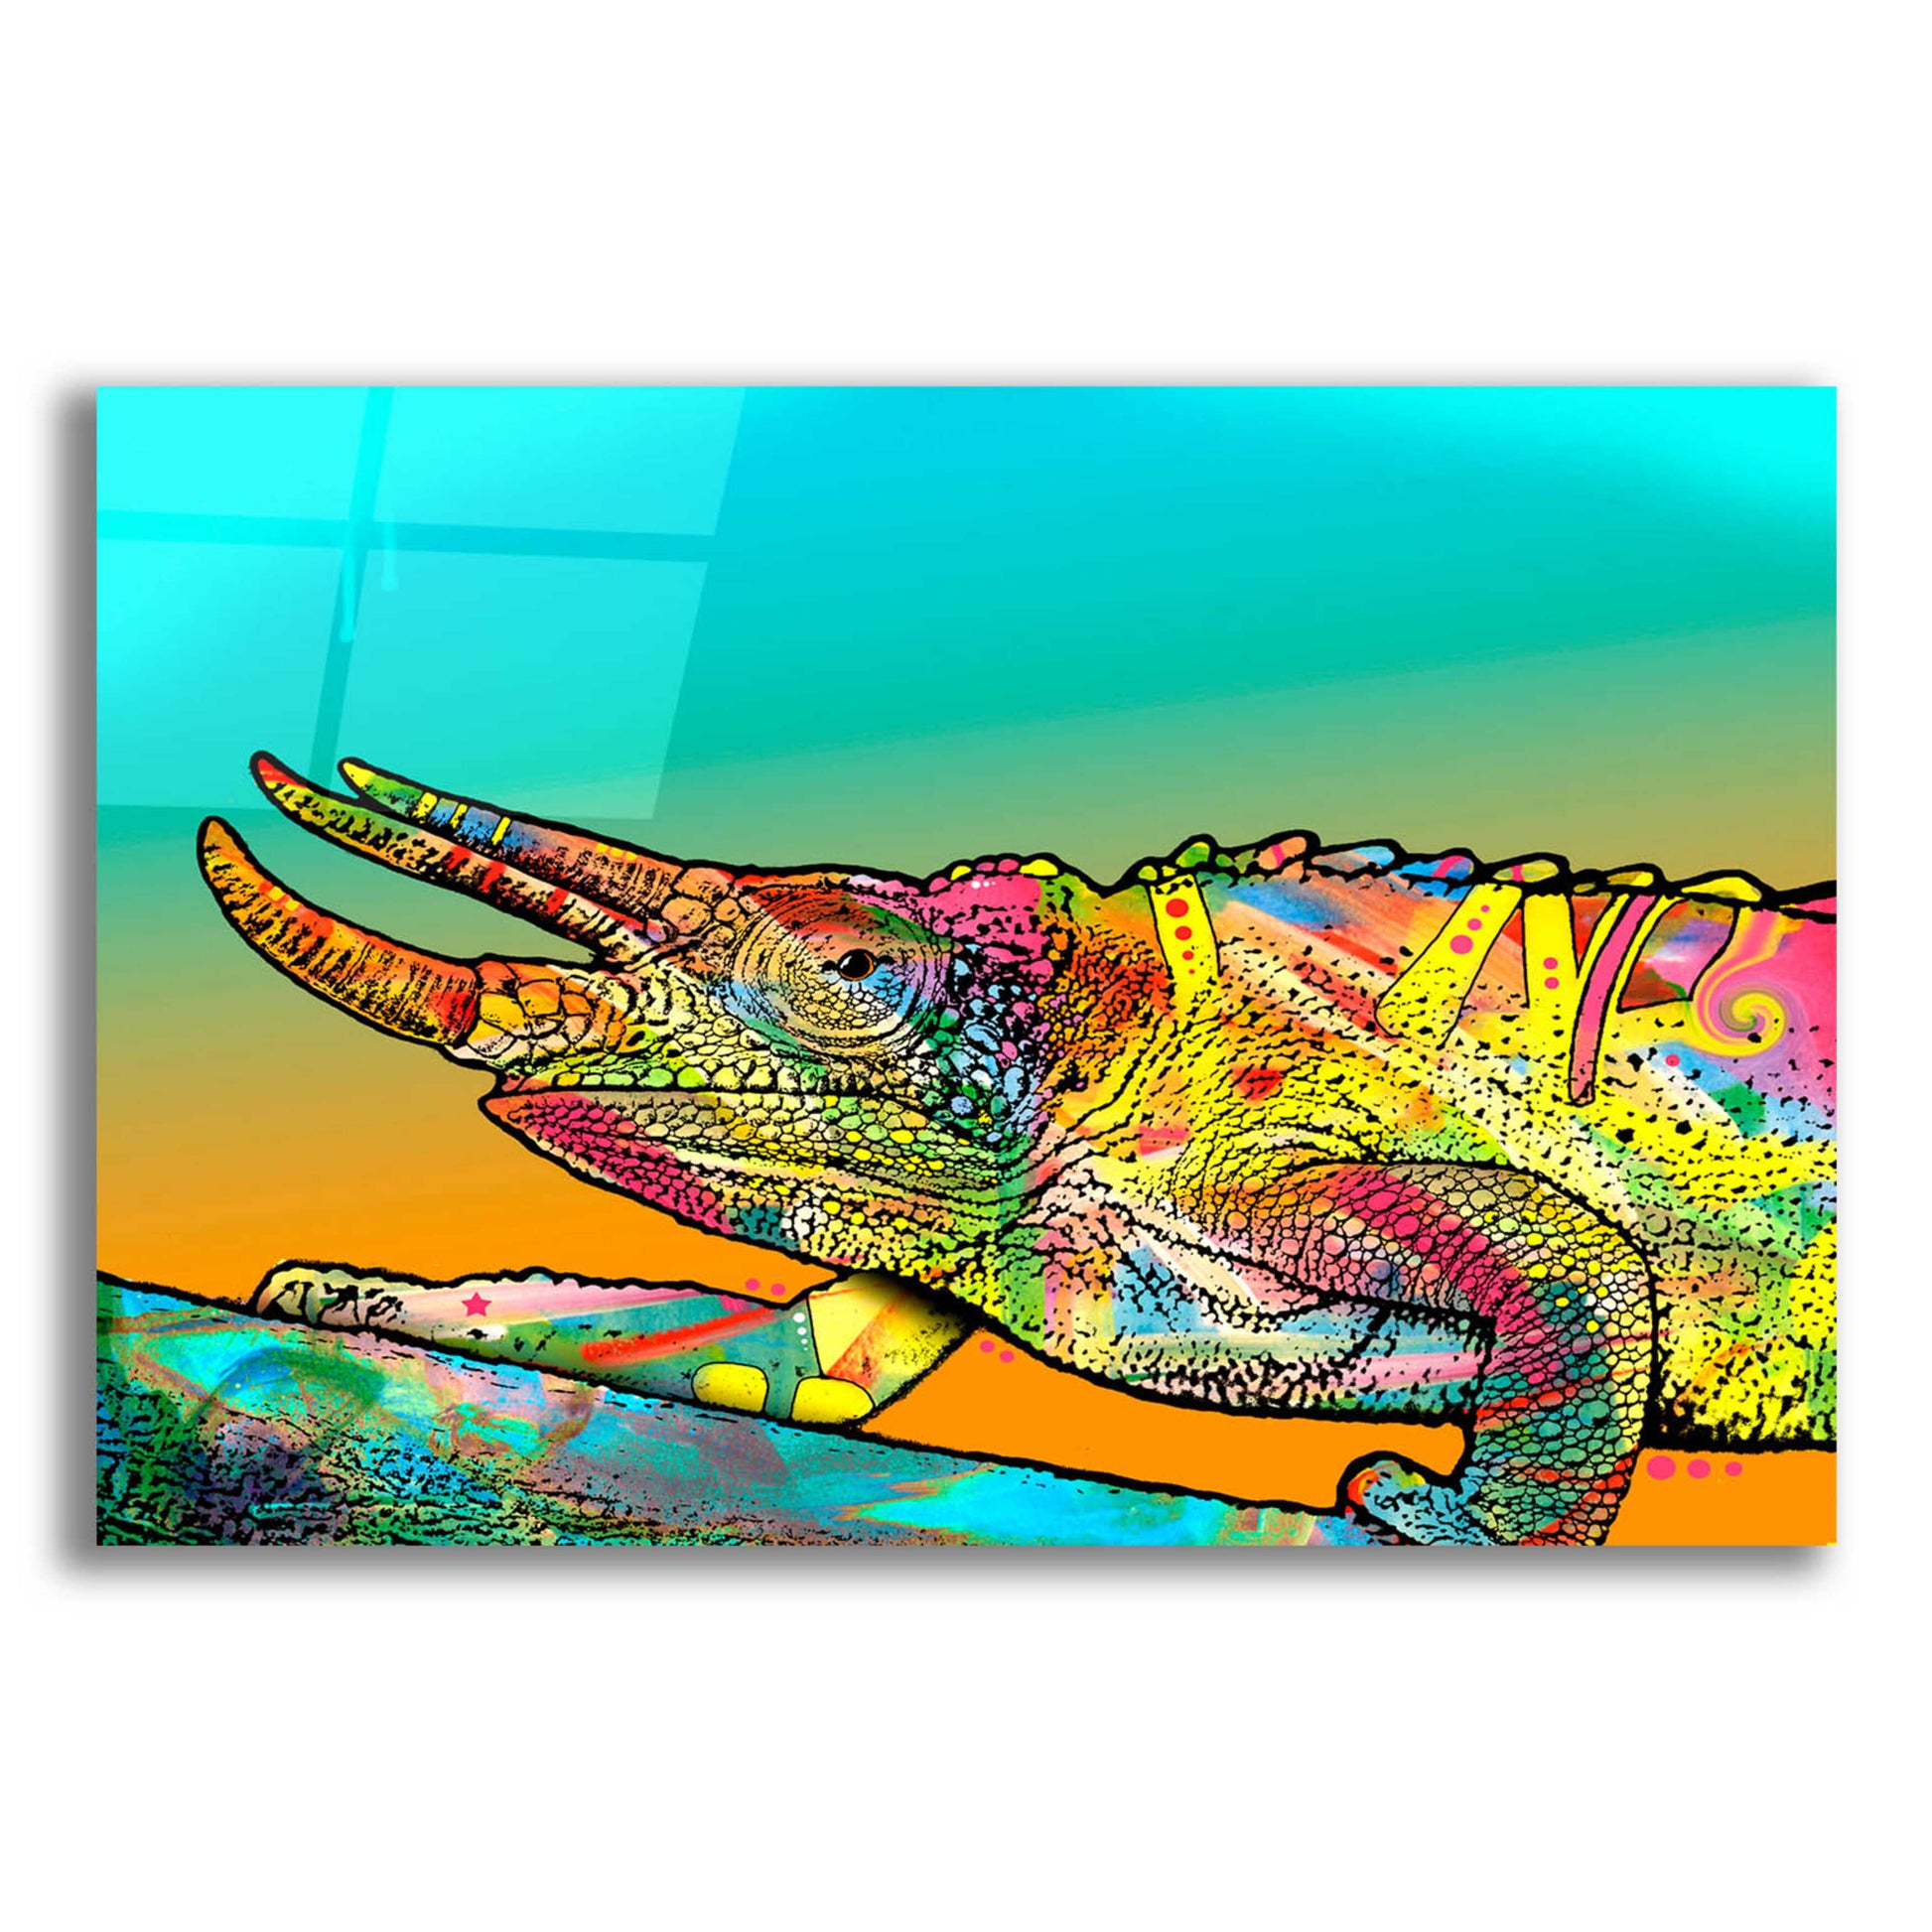 Epic Art 'Chameleon' by Dean Russo, Acrylic Glass Wall Art